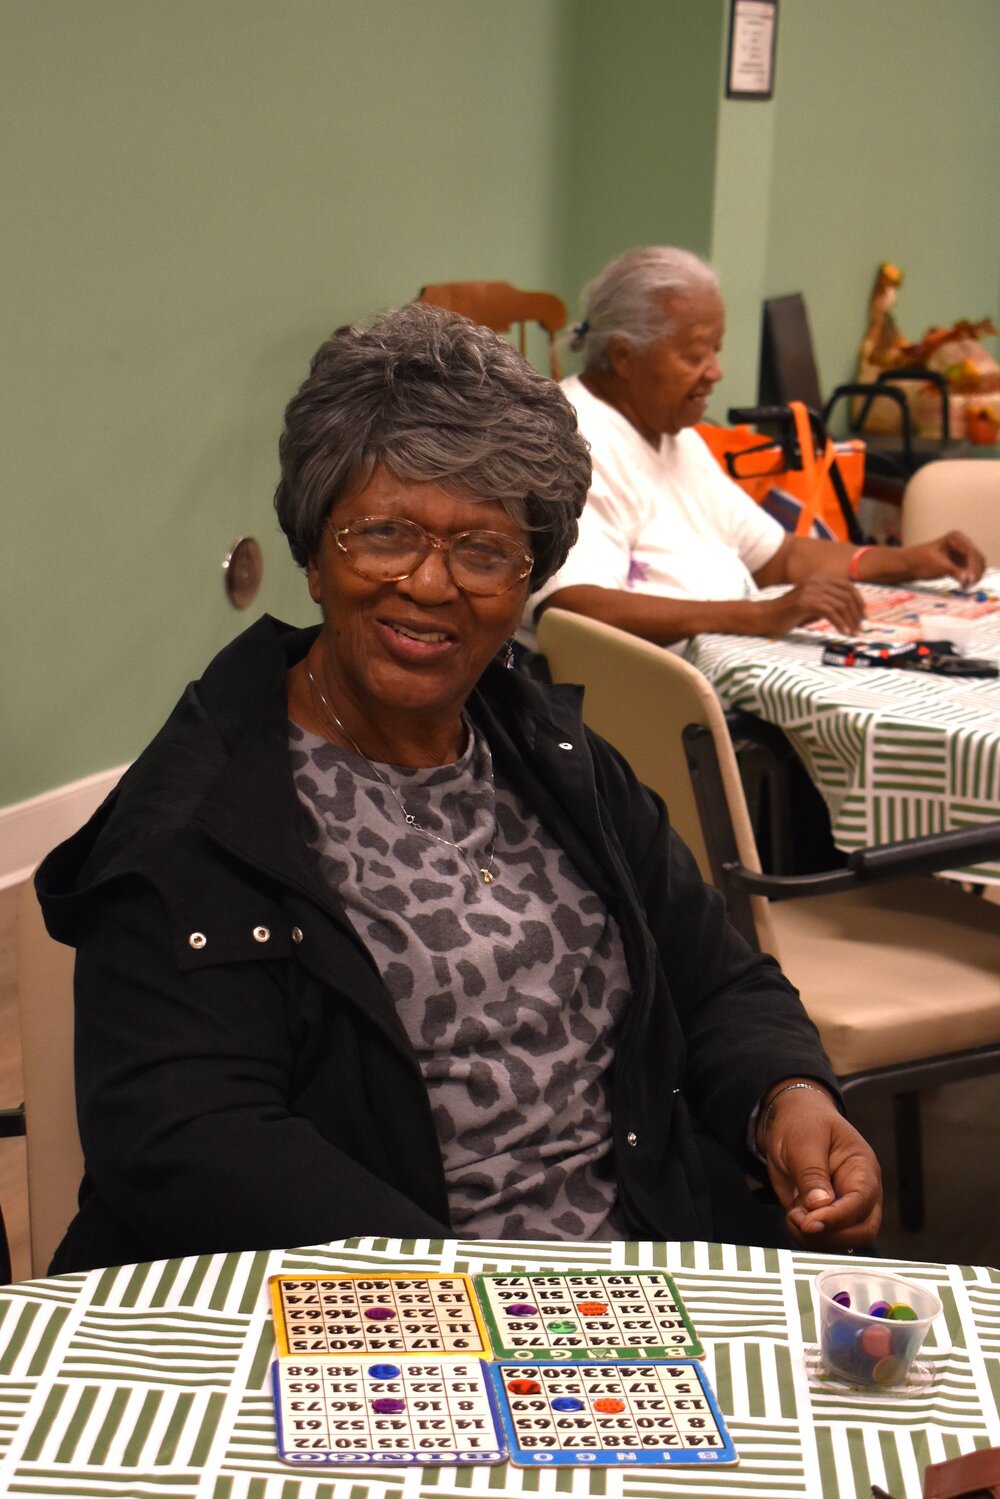 Guests looked forward to afternoon Bingo at Thrive Dorchester 2023, hosted by the Dorchester Banner at the Weinberg Intergenerational Center.